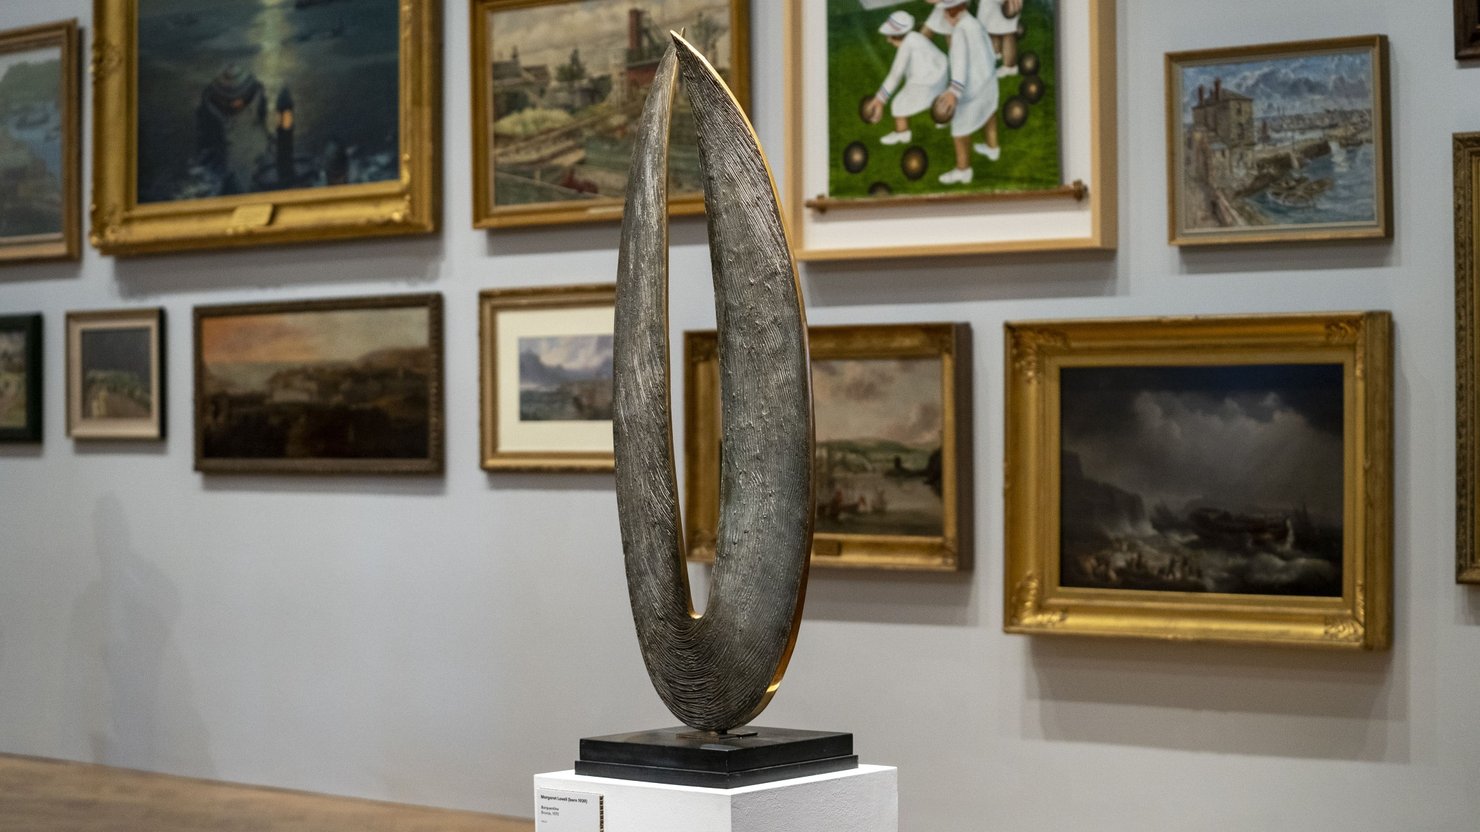 Photograph showing a bronze sculpture that appears like a sail, on a plinth within an art gallery.